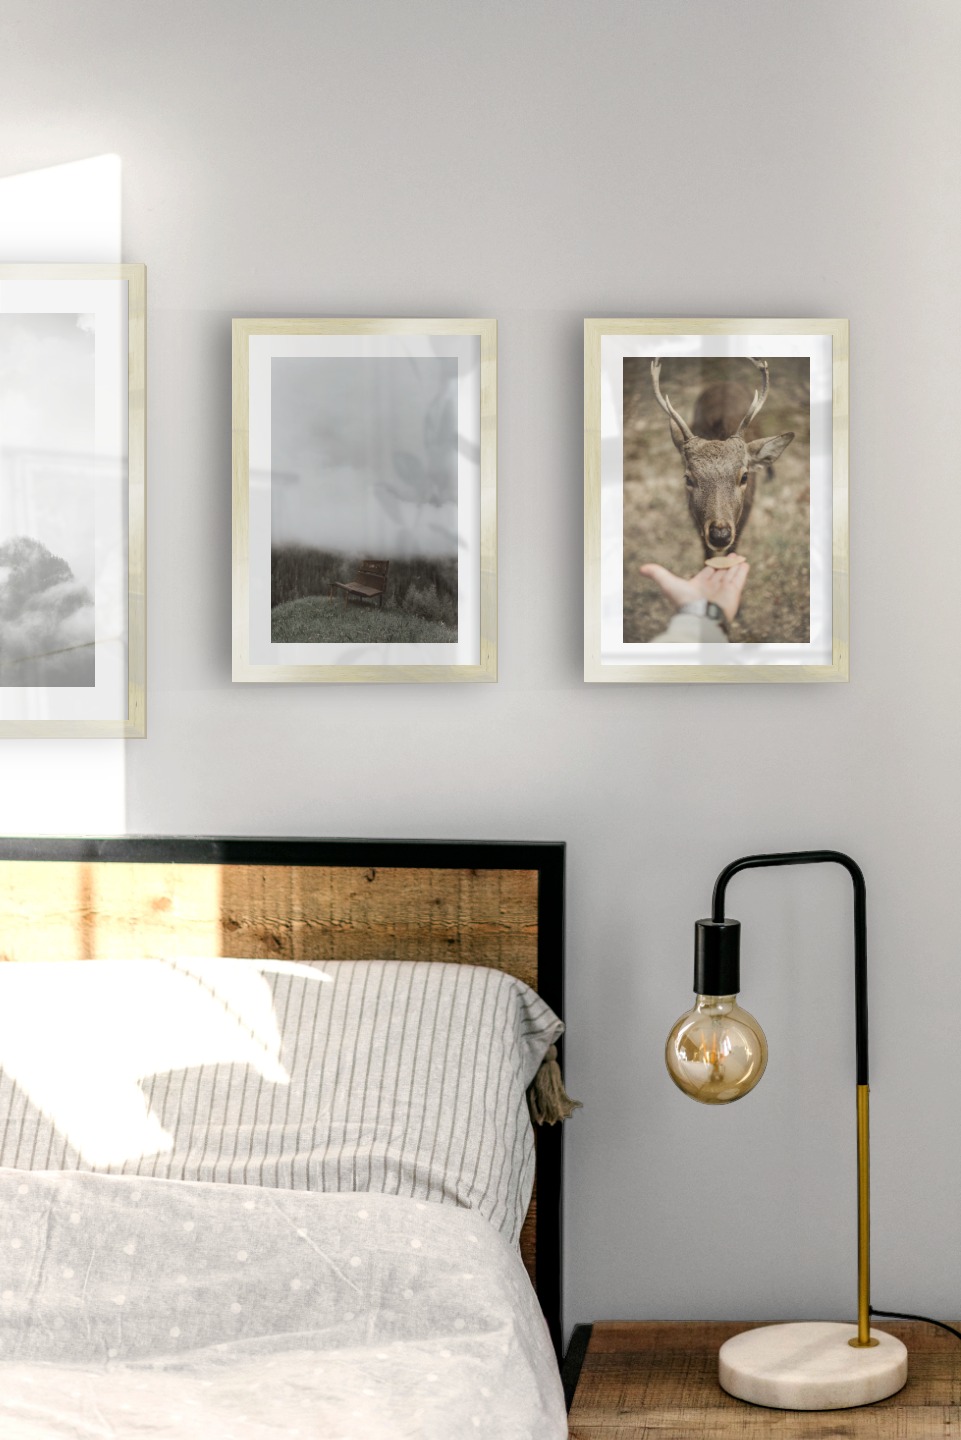 Gallery wall with picture frames in gold in sizes 30x40 and 21x30 with prints "Trees and mountains in fog", "Bench in misty nature" and "Feed a deer"